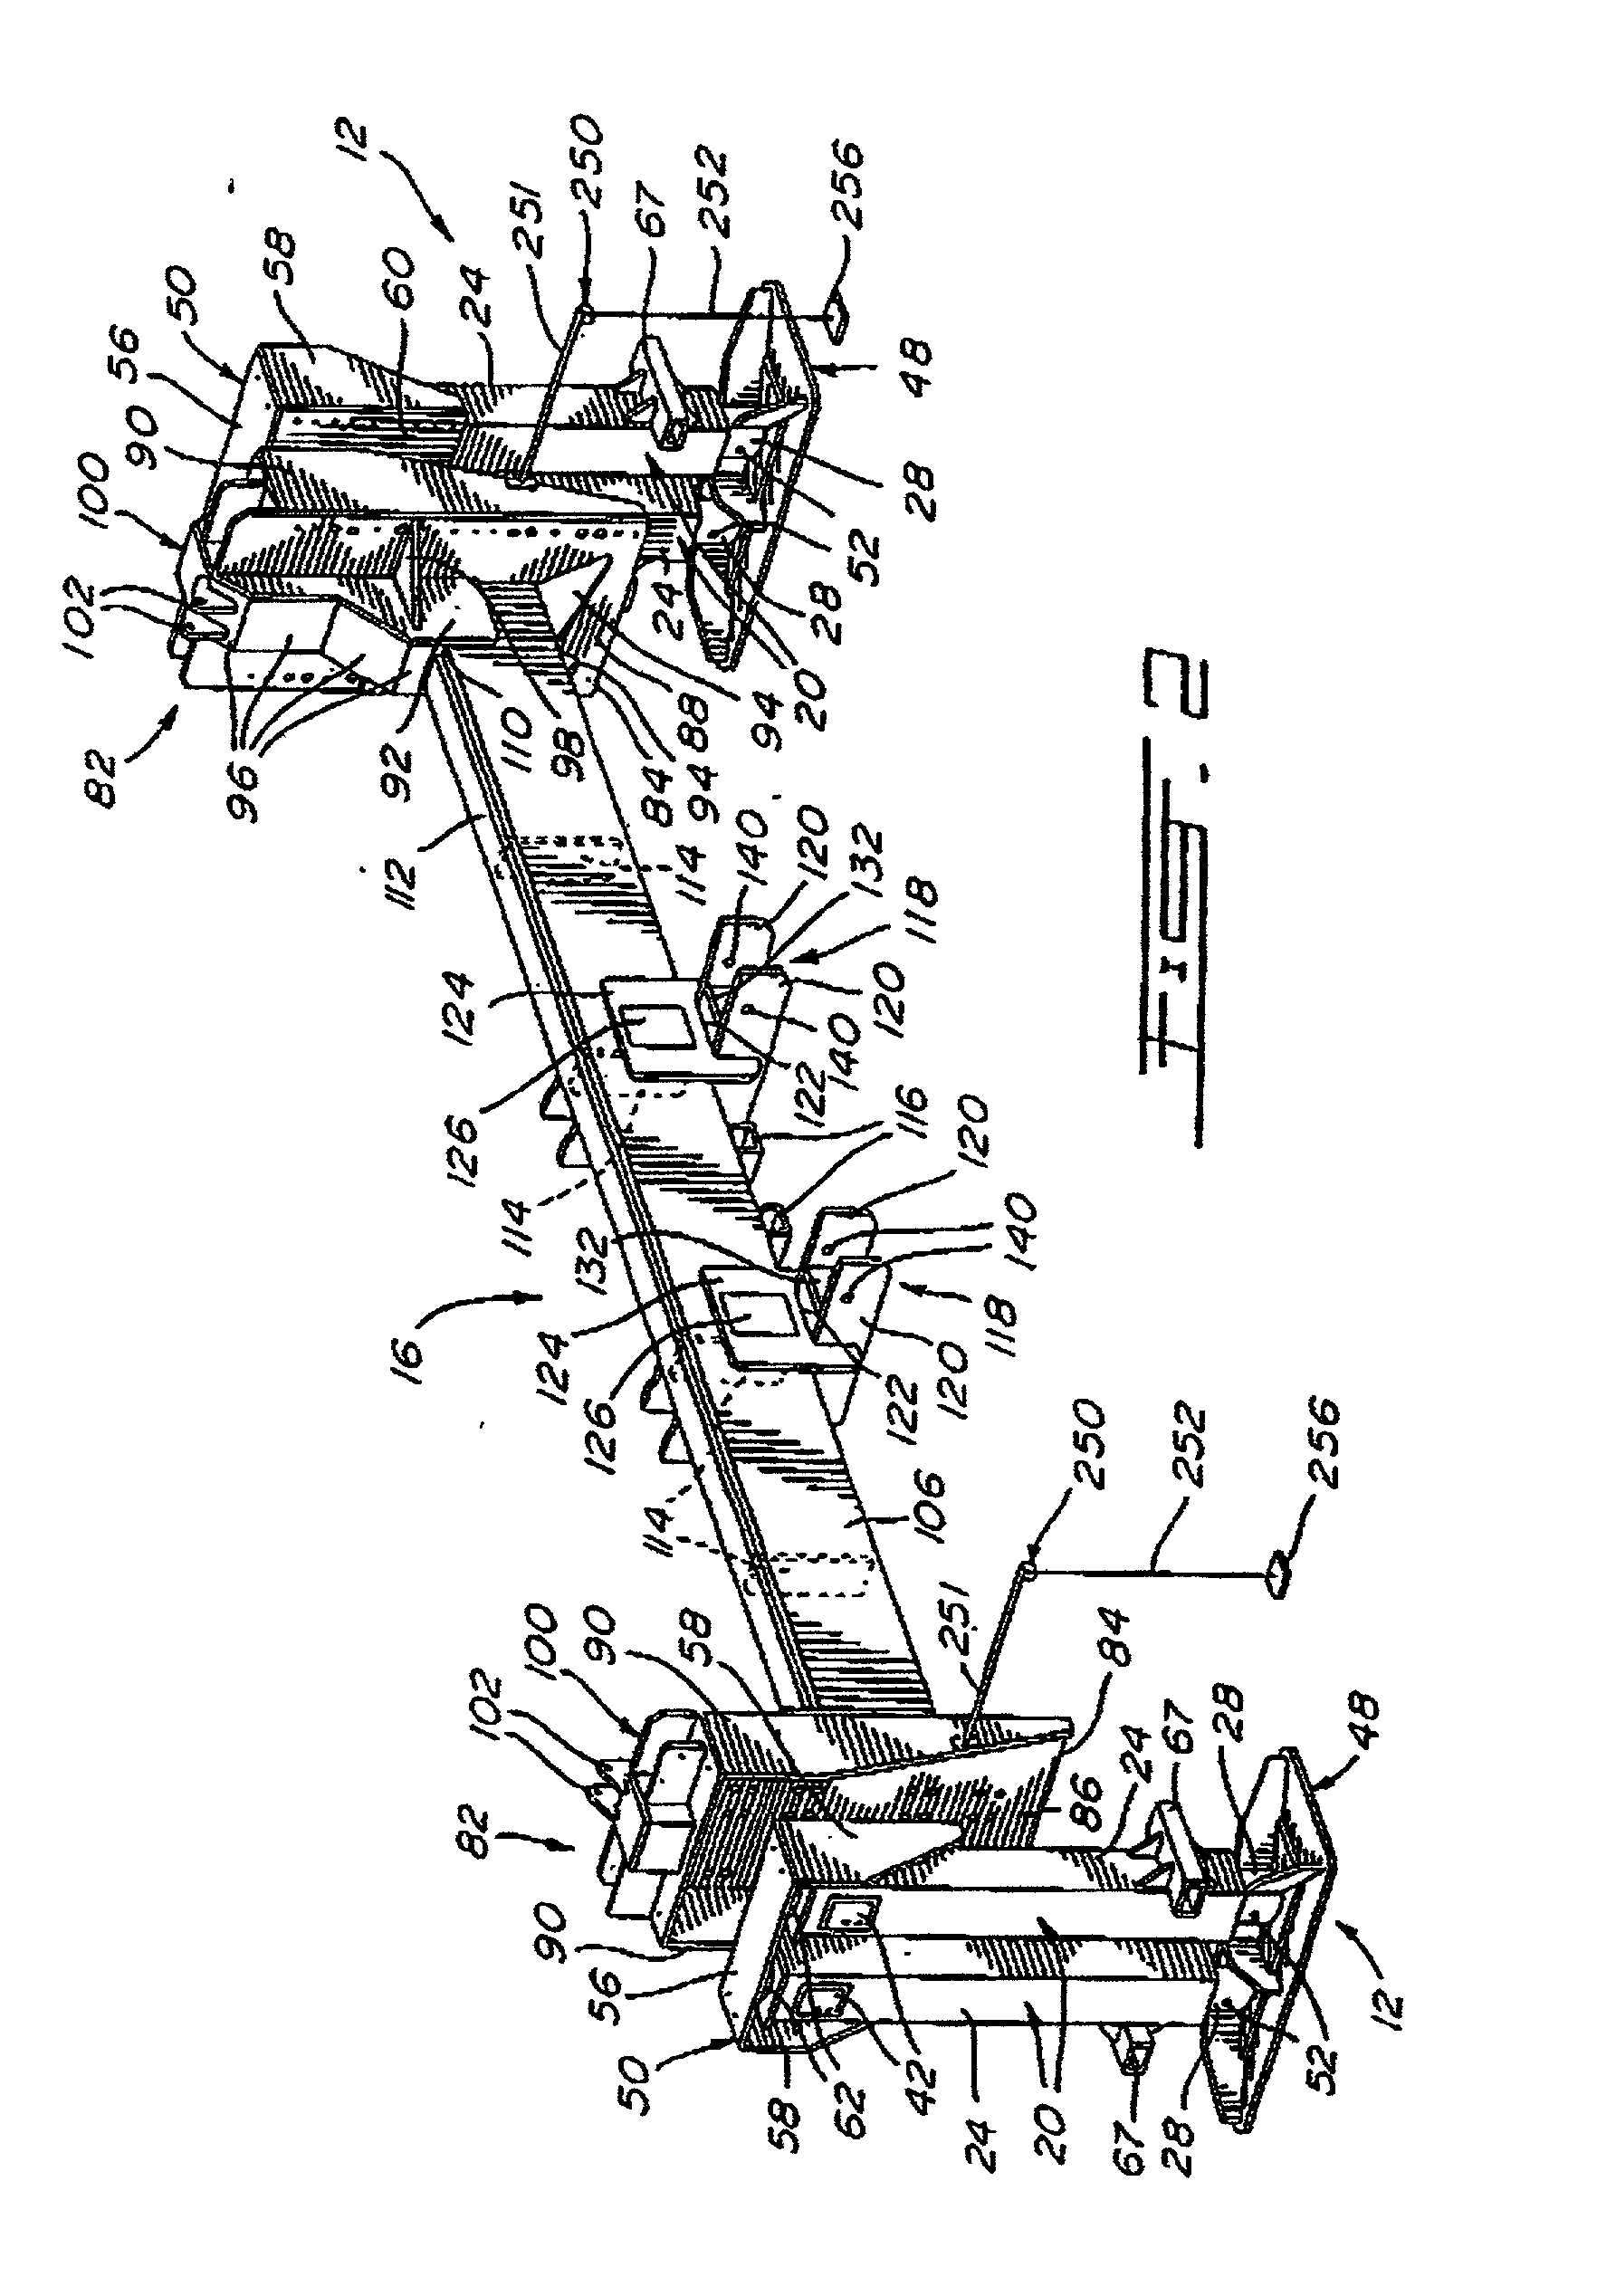 Heavy vehicle lifting device and method